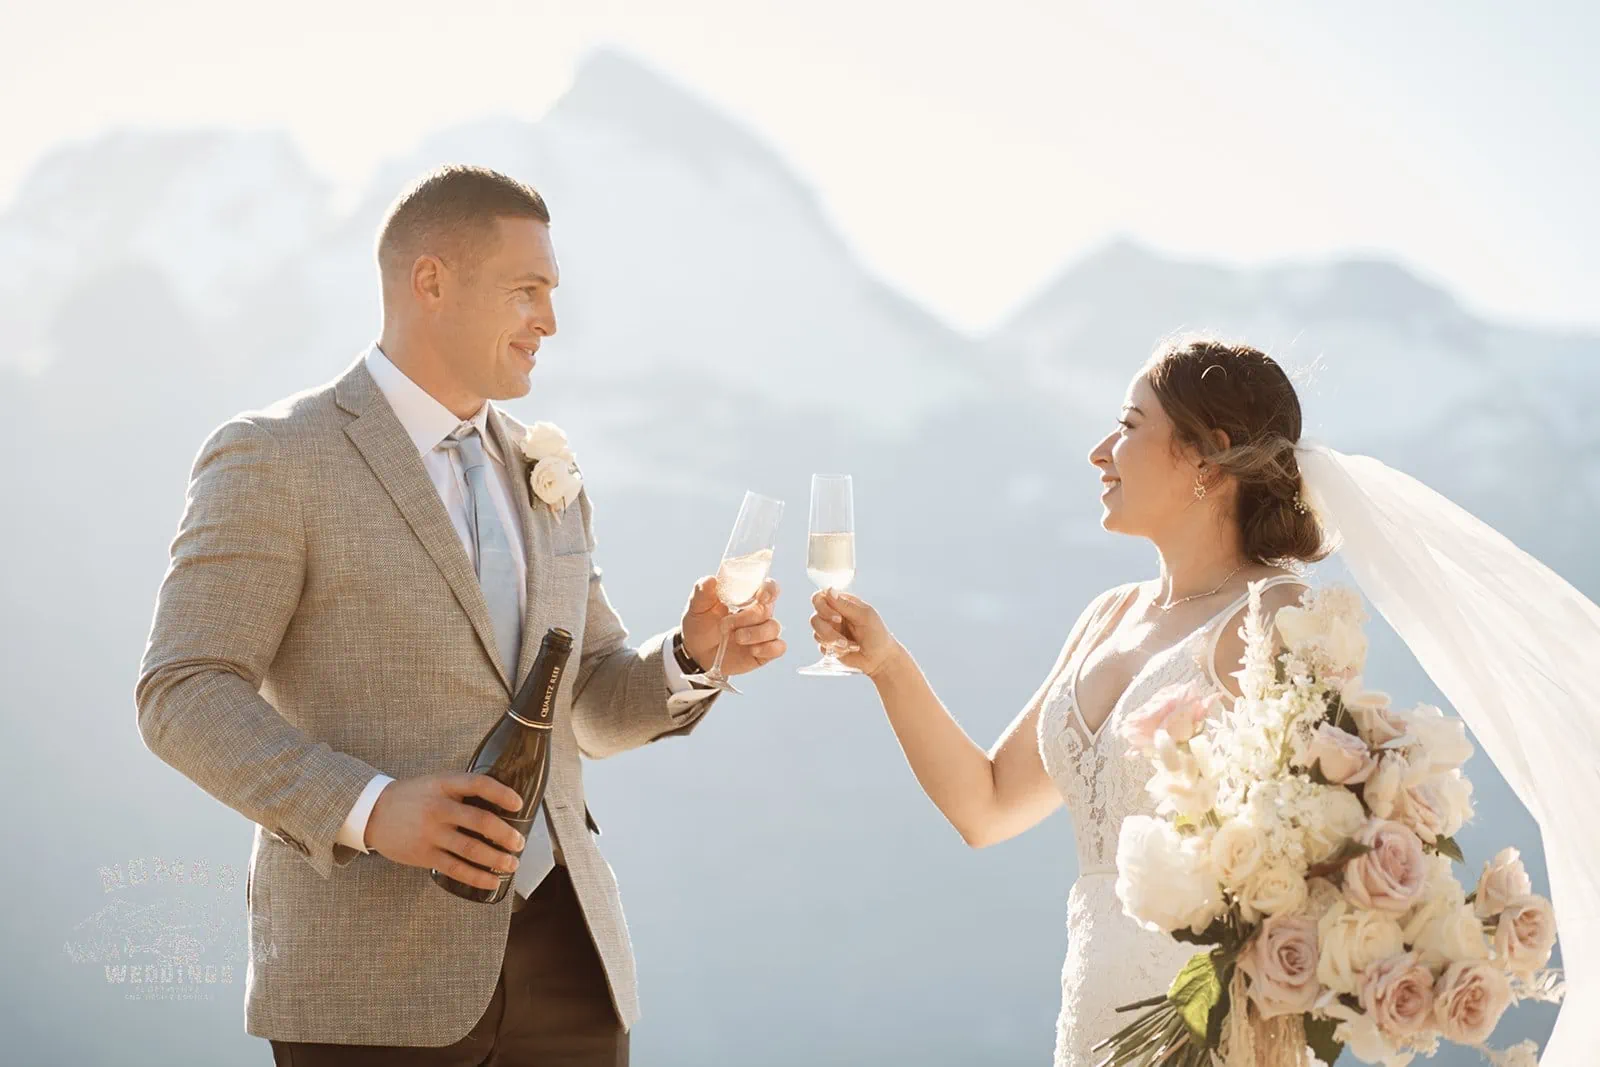 Amy & Eden toasting champagne in front of mountains at their enchanting Lake Erskine heli elopement wedding.